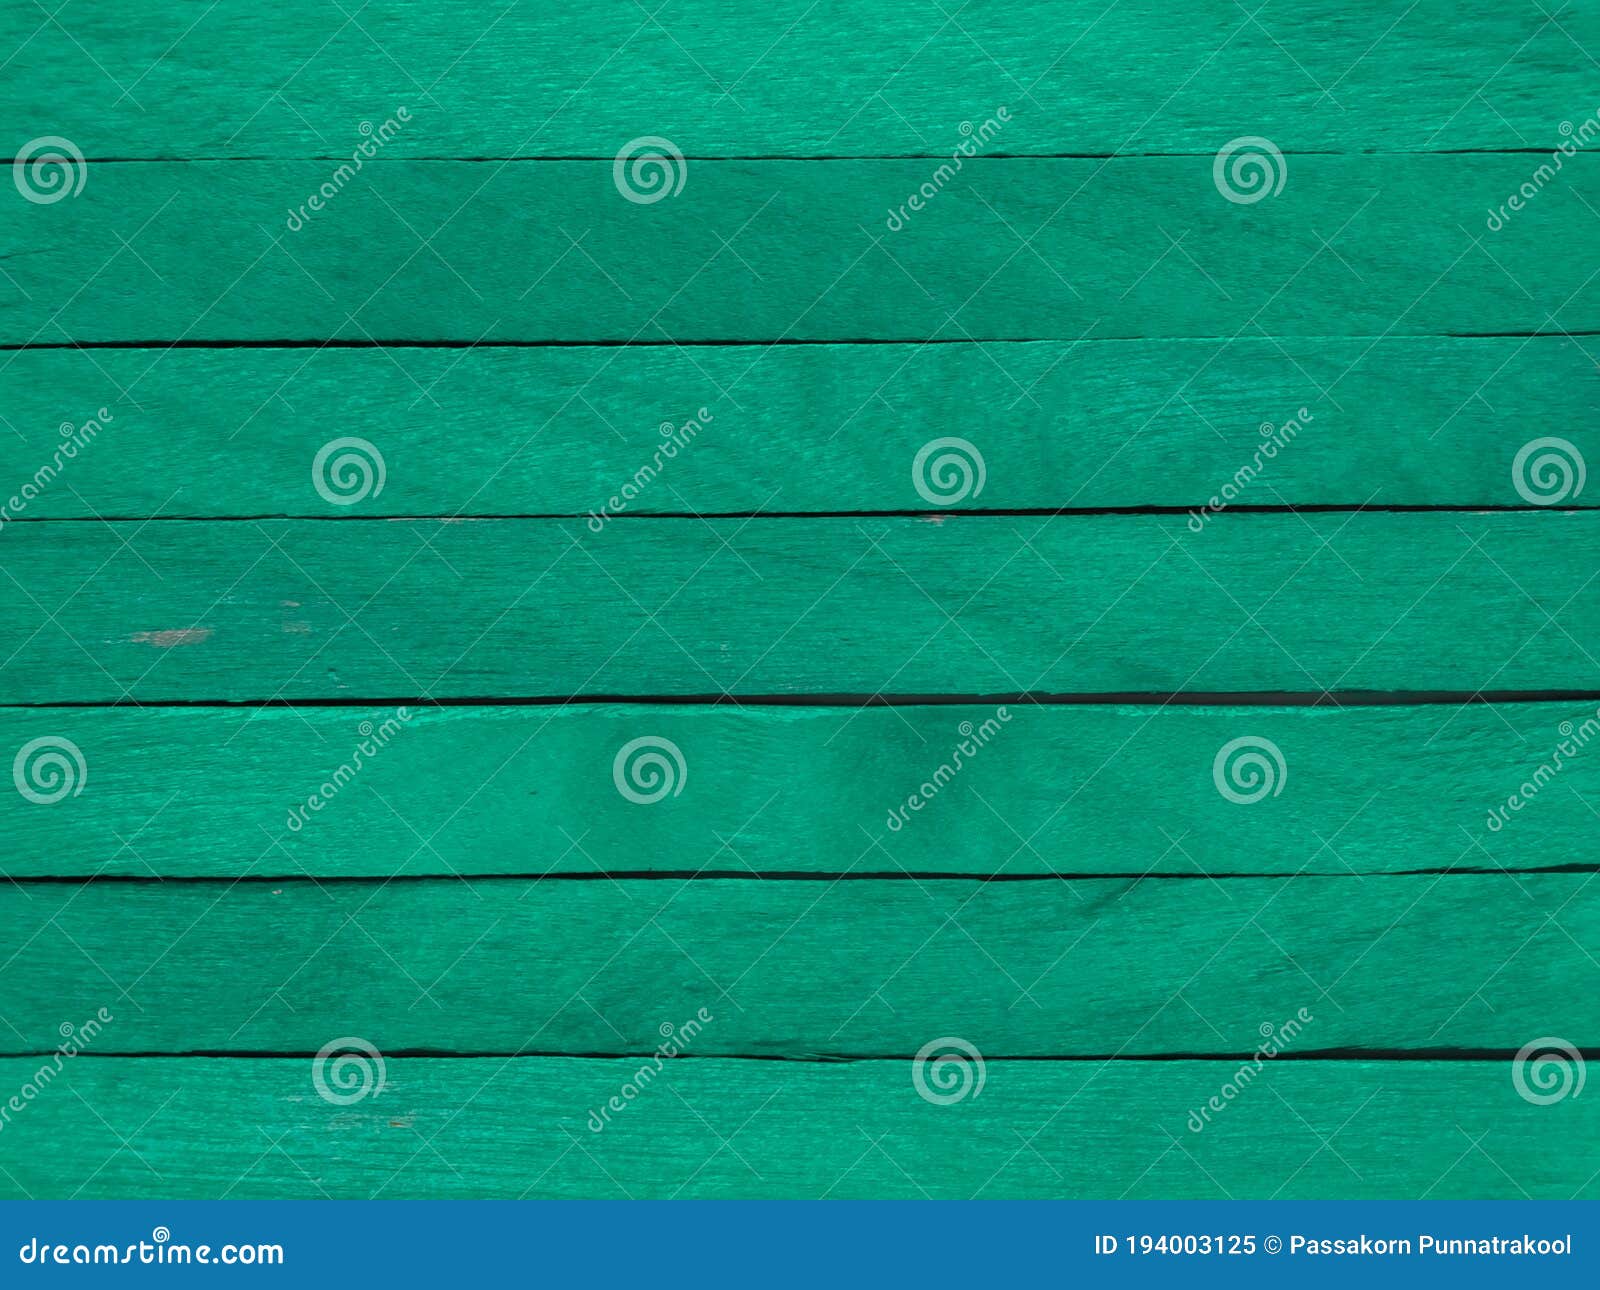 Bluish Green and Wooden Pattern Popsicle Sticks. Stock Image